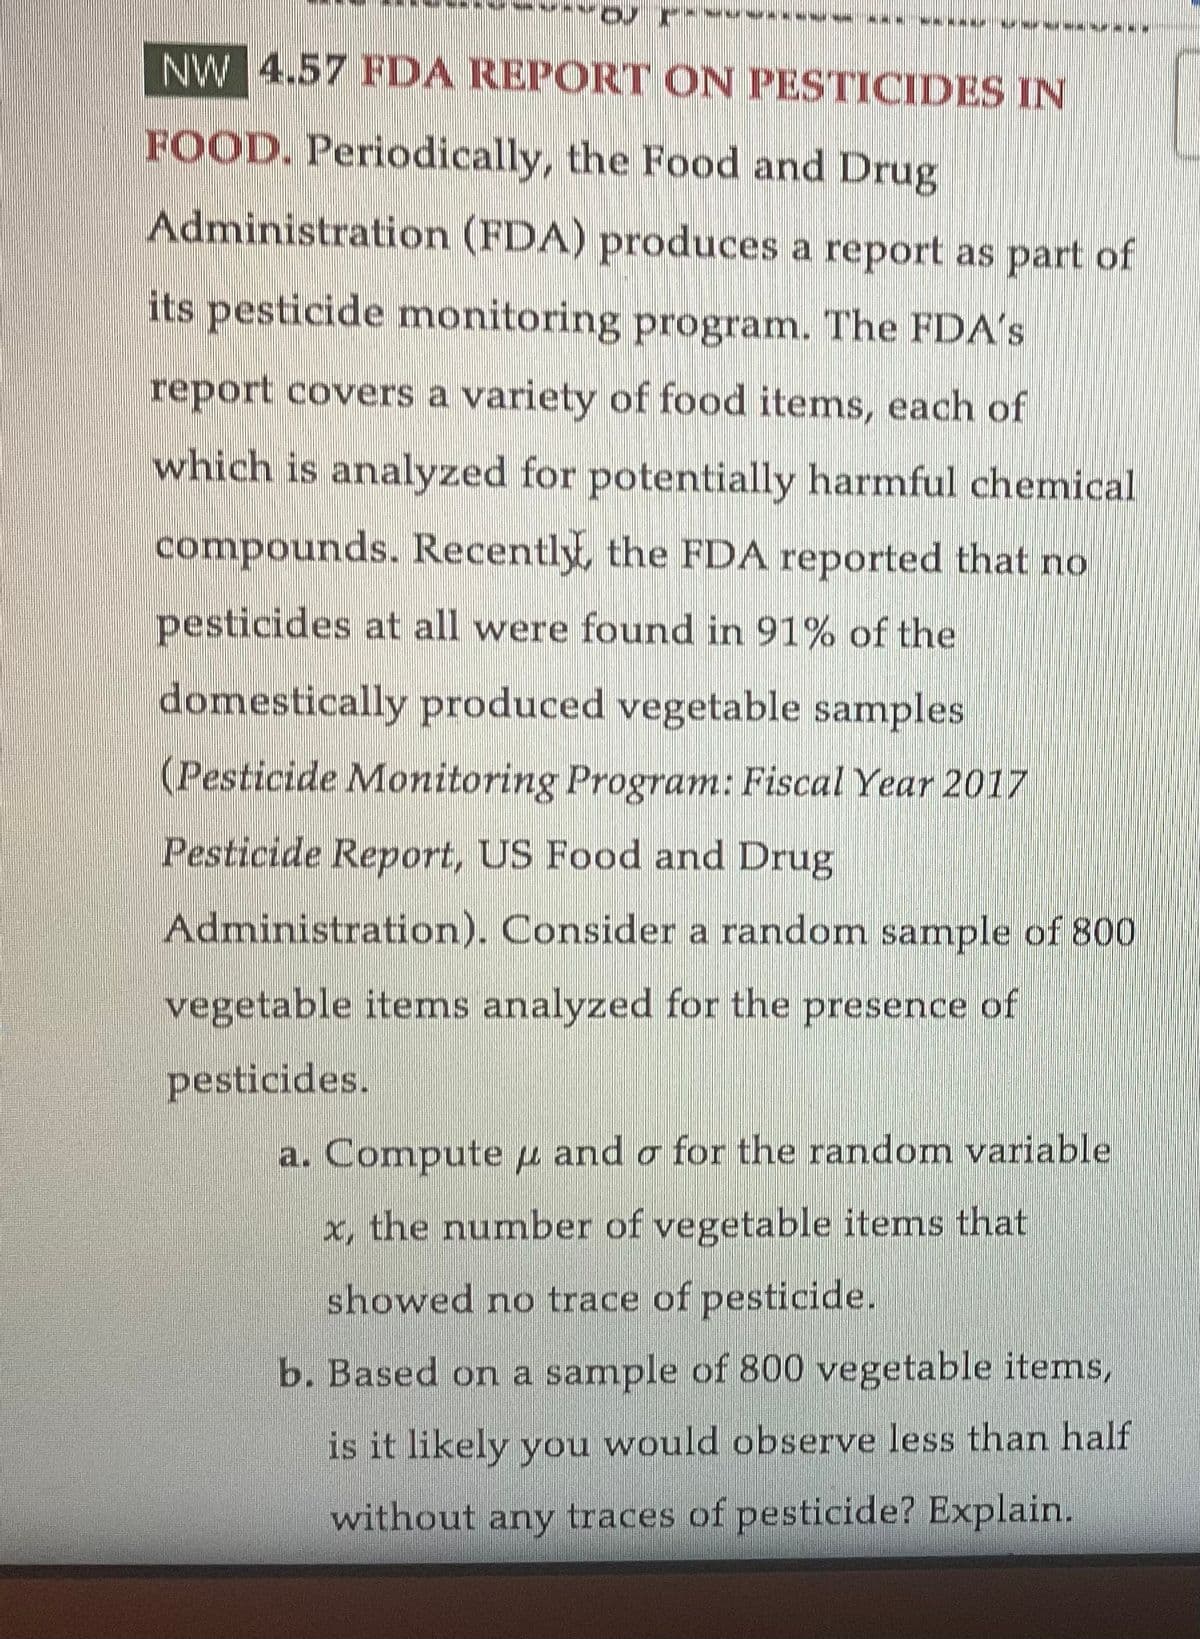 OU
--------
ww
NW 4.57 FDA REPORT ON PESTICIDES IN
FOOD. Periodically, the Food and Drug
Administration (FDA) produces a report as part of
its pesticide monitoring program. The FDA's
report covers a variety of food items, each of
which is analyzed for potentially harmful chemical
compounds. Recently, the FDA reported that no
pesticides at all were found in 91% of the
domestically produced vegetable samples.
(Pesticide Monitoring Program: Fiscal Year 2017
Pesticide Report, US Food and Drug
Administration). Consider a random sample of 800
vegetable items analyzed for the presence of
pesticides.
a. Compute u and o for the random variable
x, the number of vegetable items that
showed no trace of pesticide.
b. Based on a sample of 800 vegetable items,
is it likely you would observe less than half
without any traces of pesticide? Explain.